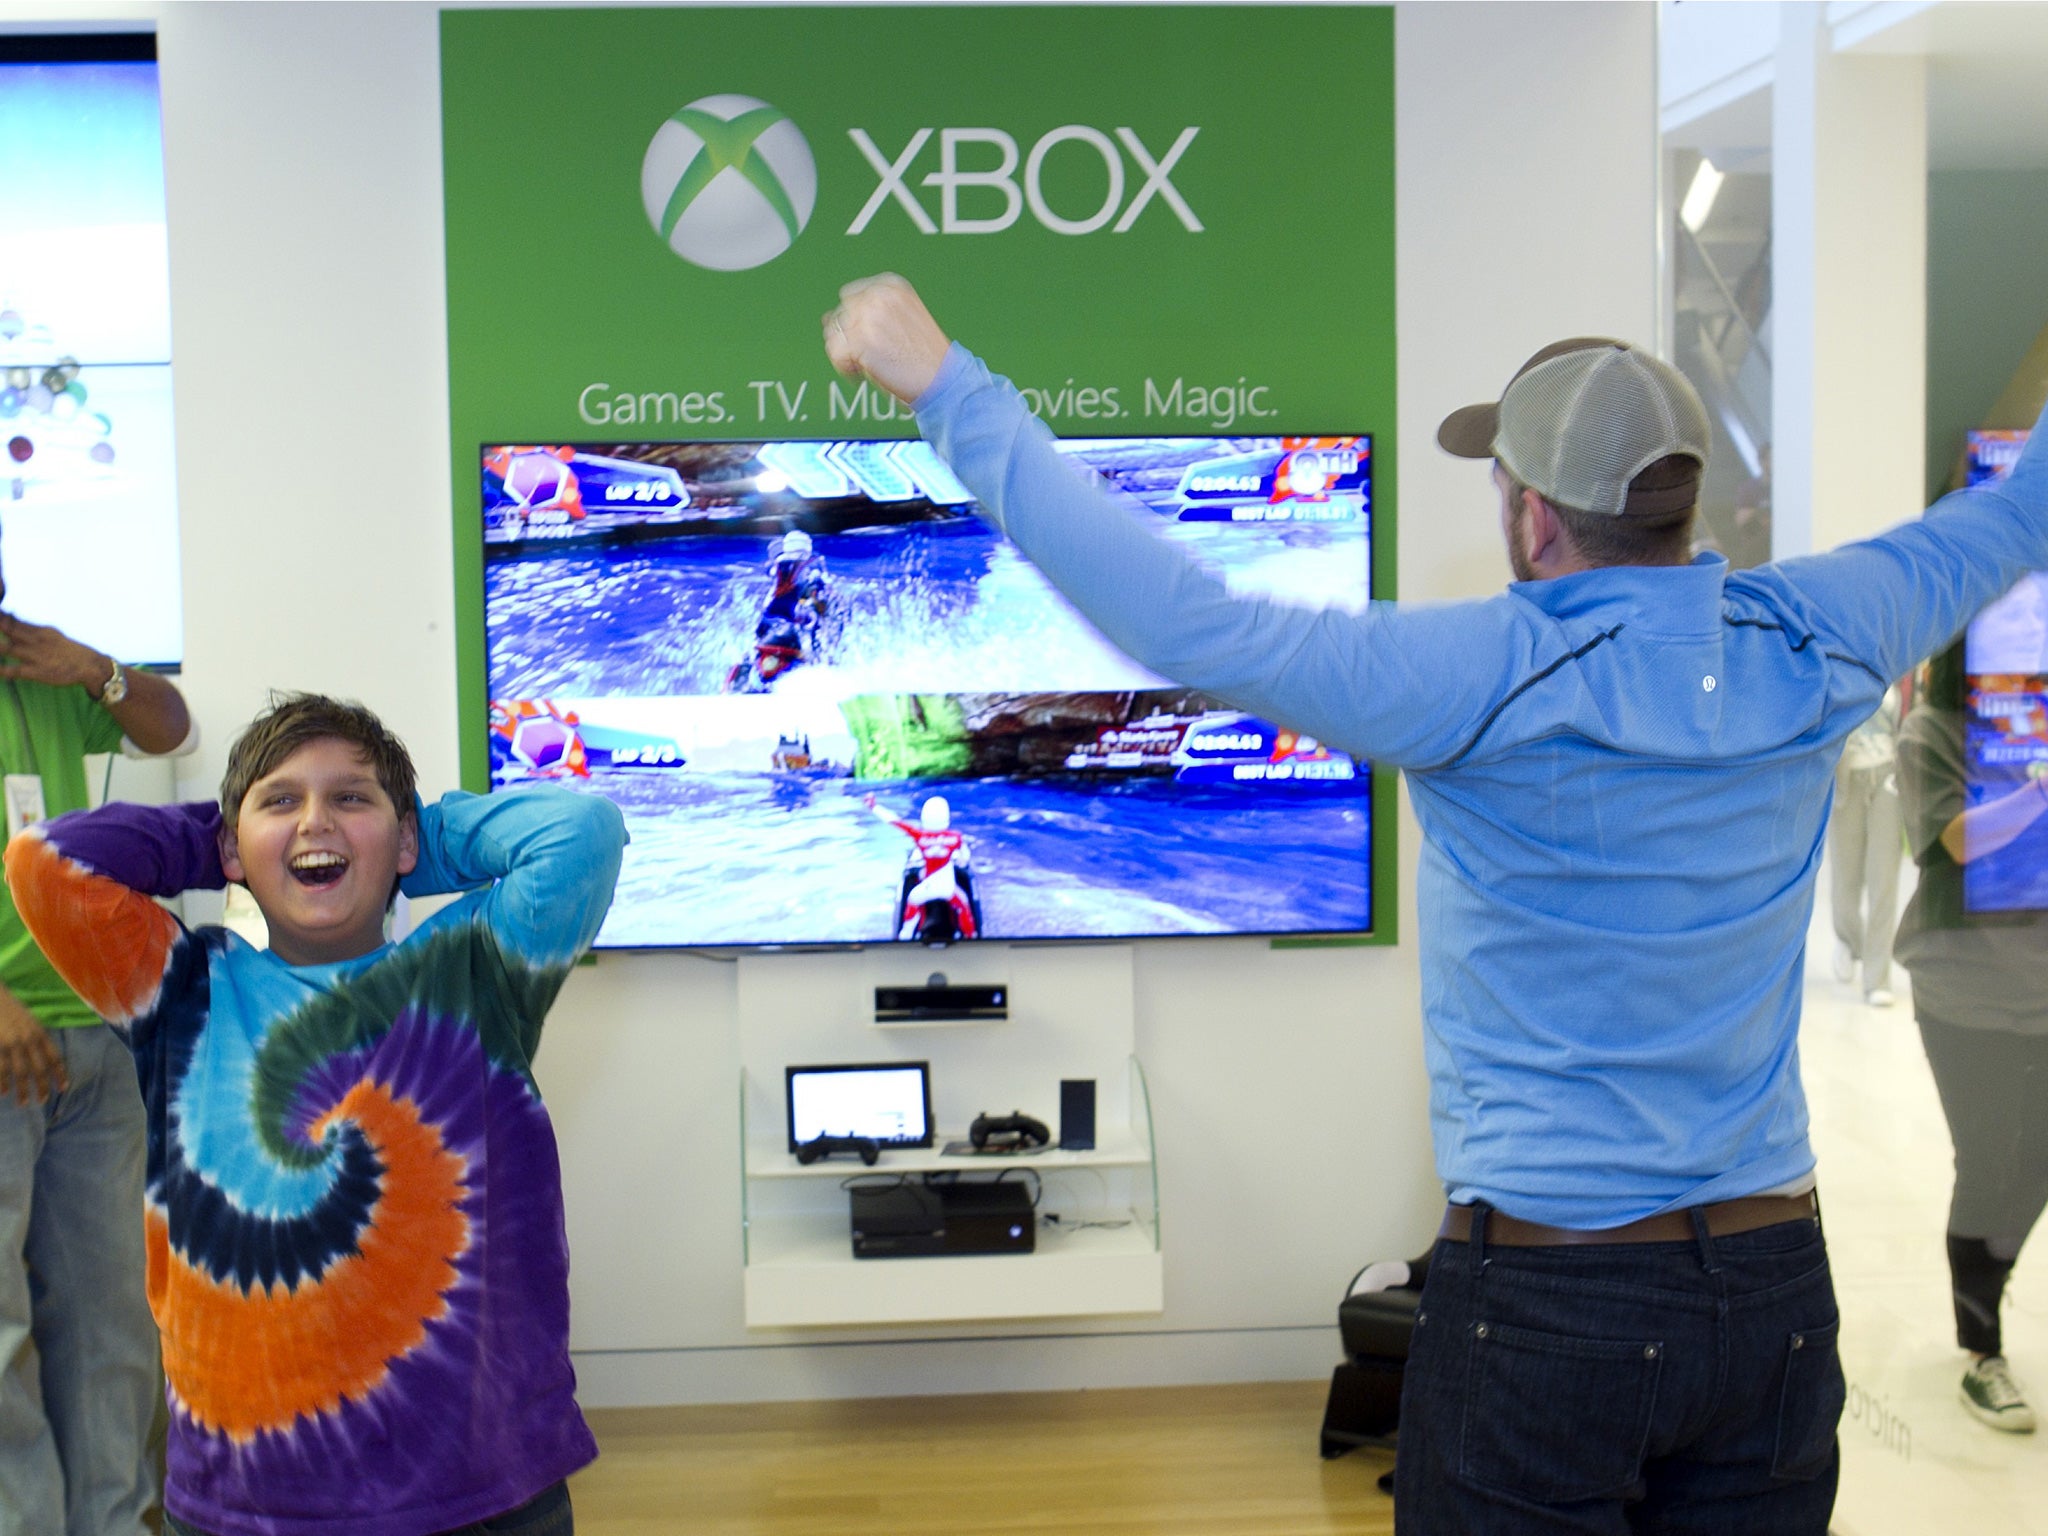 xbox x with kinect